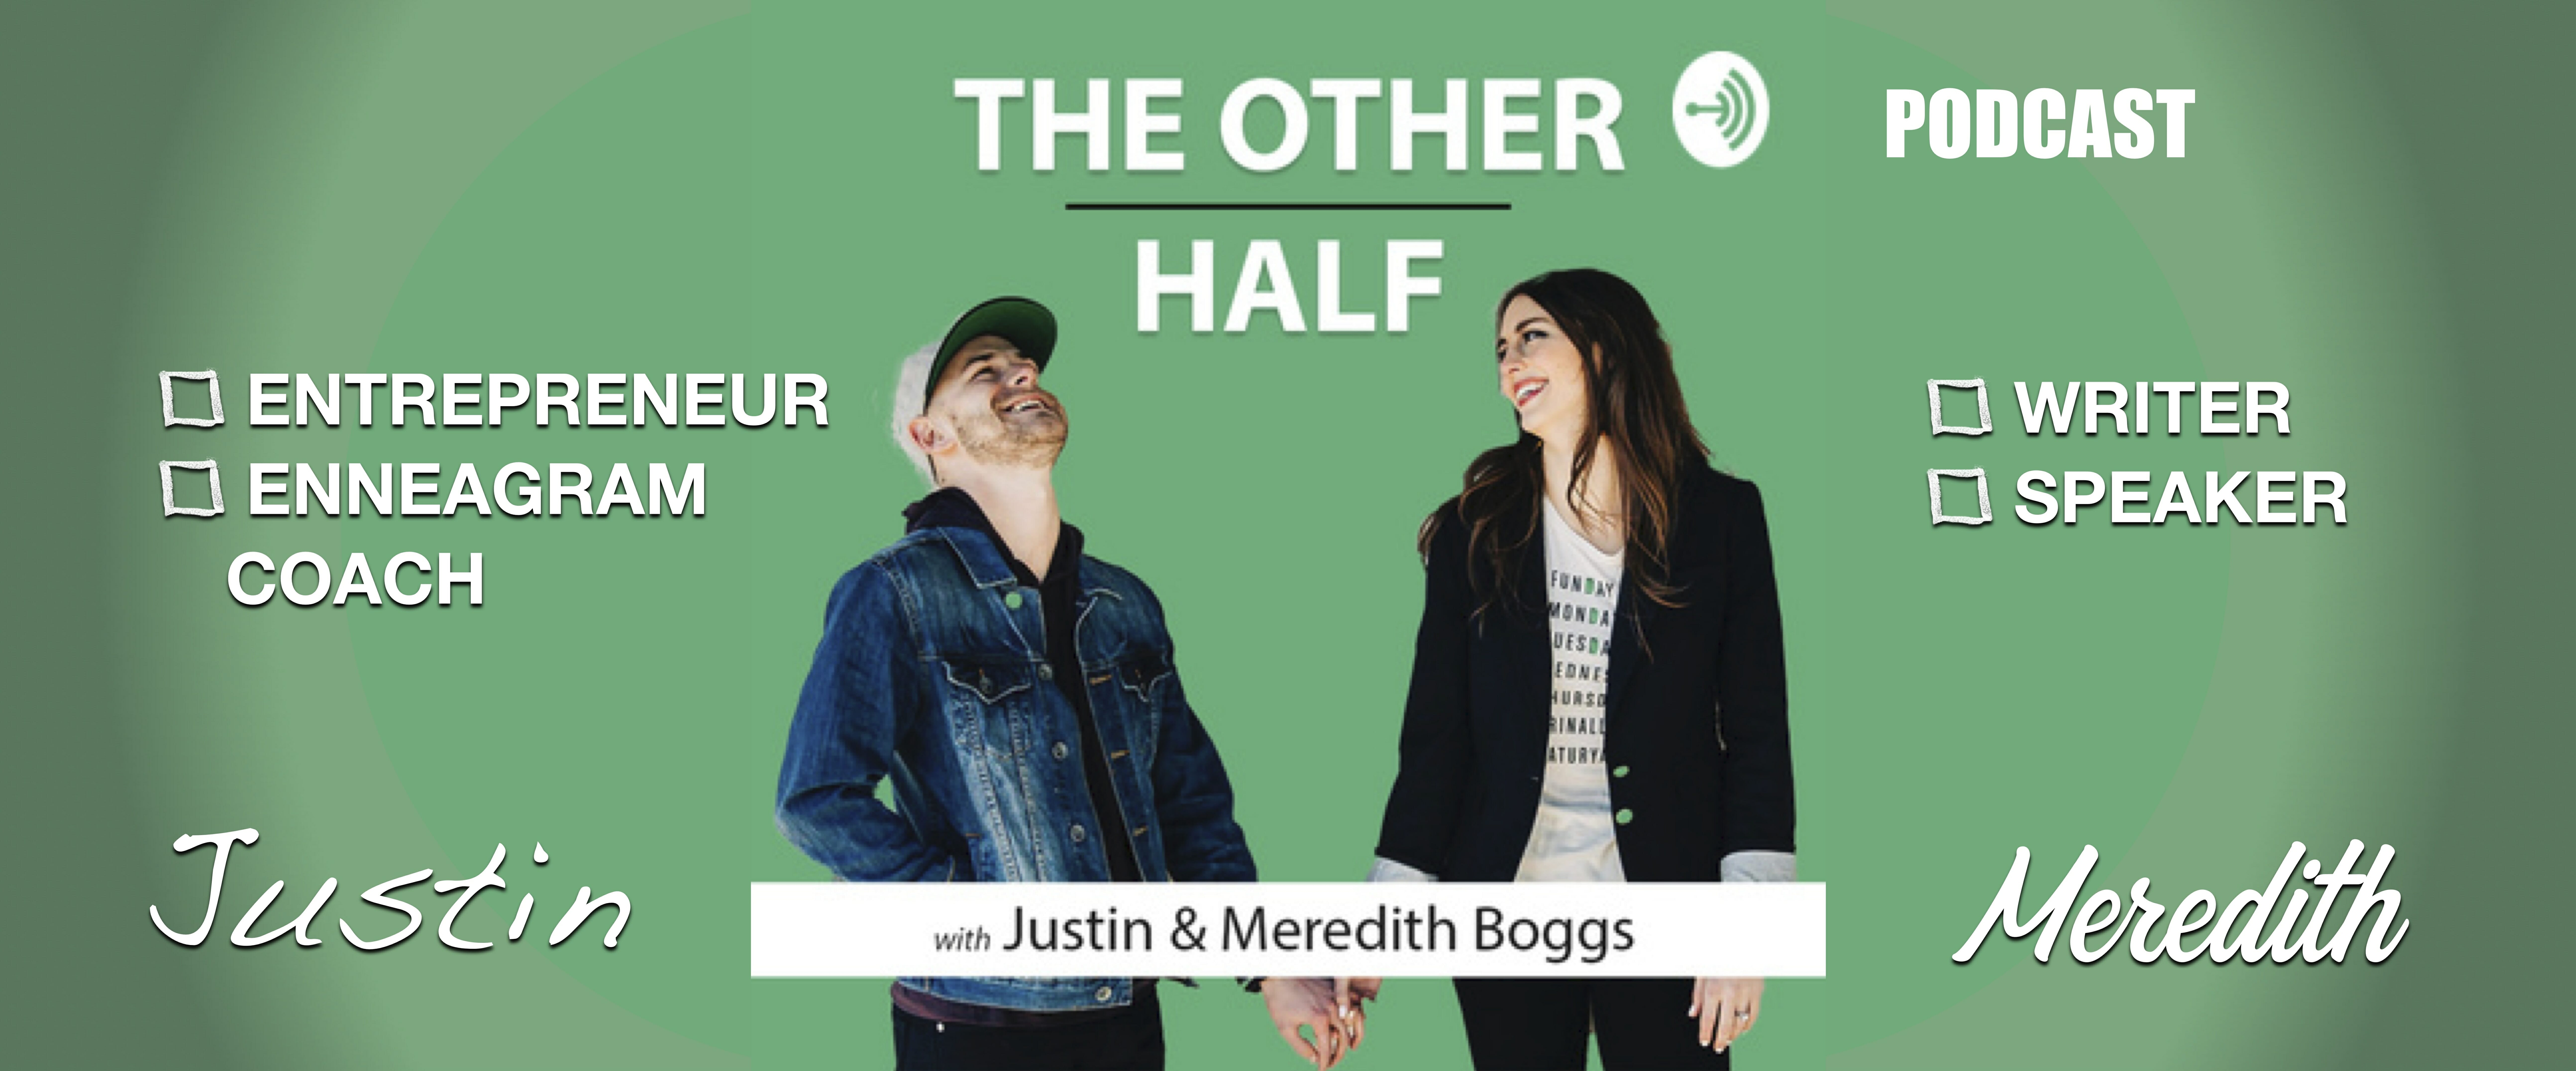 THE OTHER HALF PODCAST: Marriage After God with Aaron and Jennifer Smith